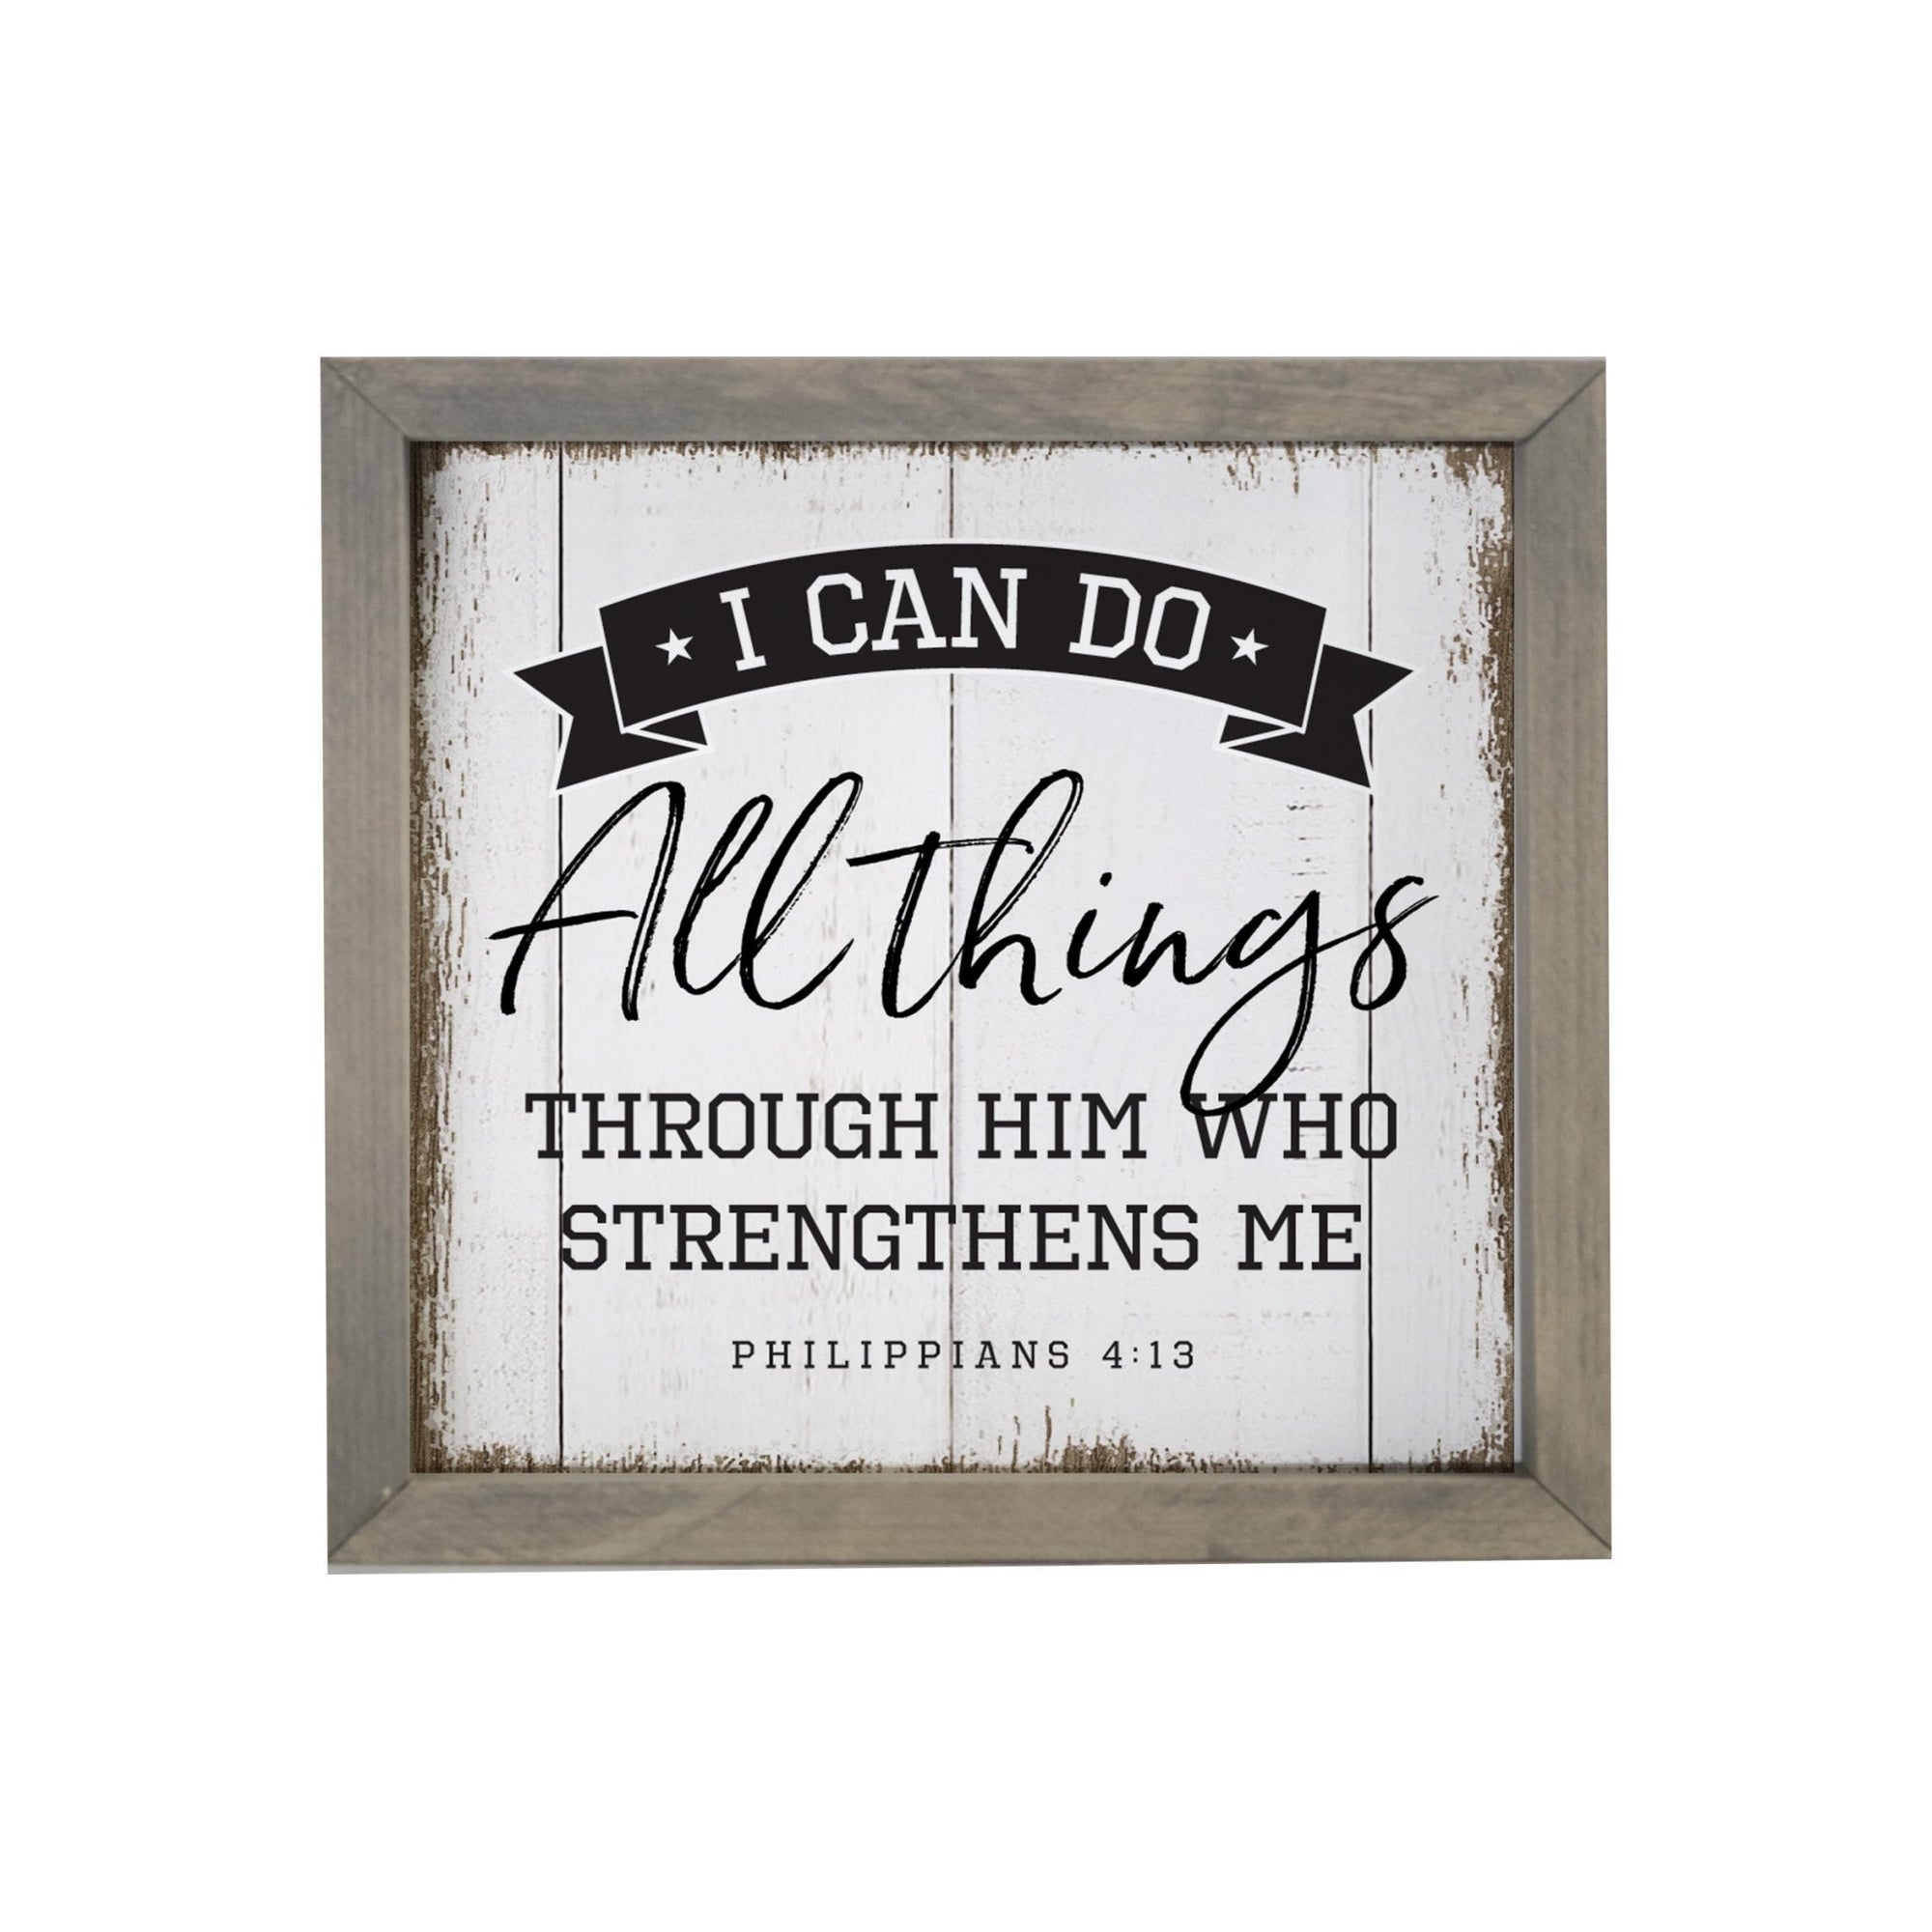 Elegant Baseball Framed Shadow Box Shelf Décor With Inspiring Bible Verses - I Can Do All Things - LifeSong Milestones